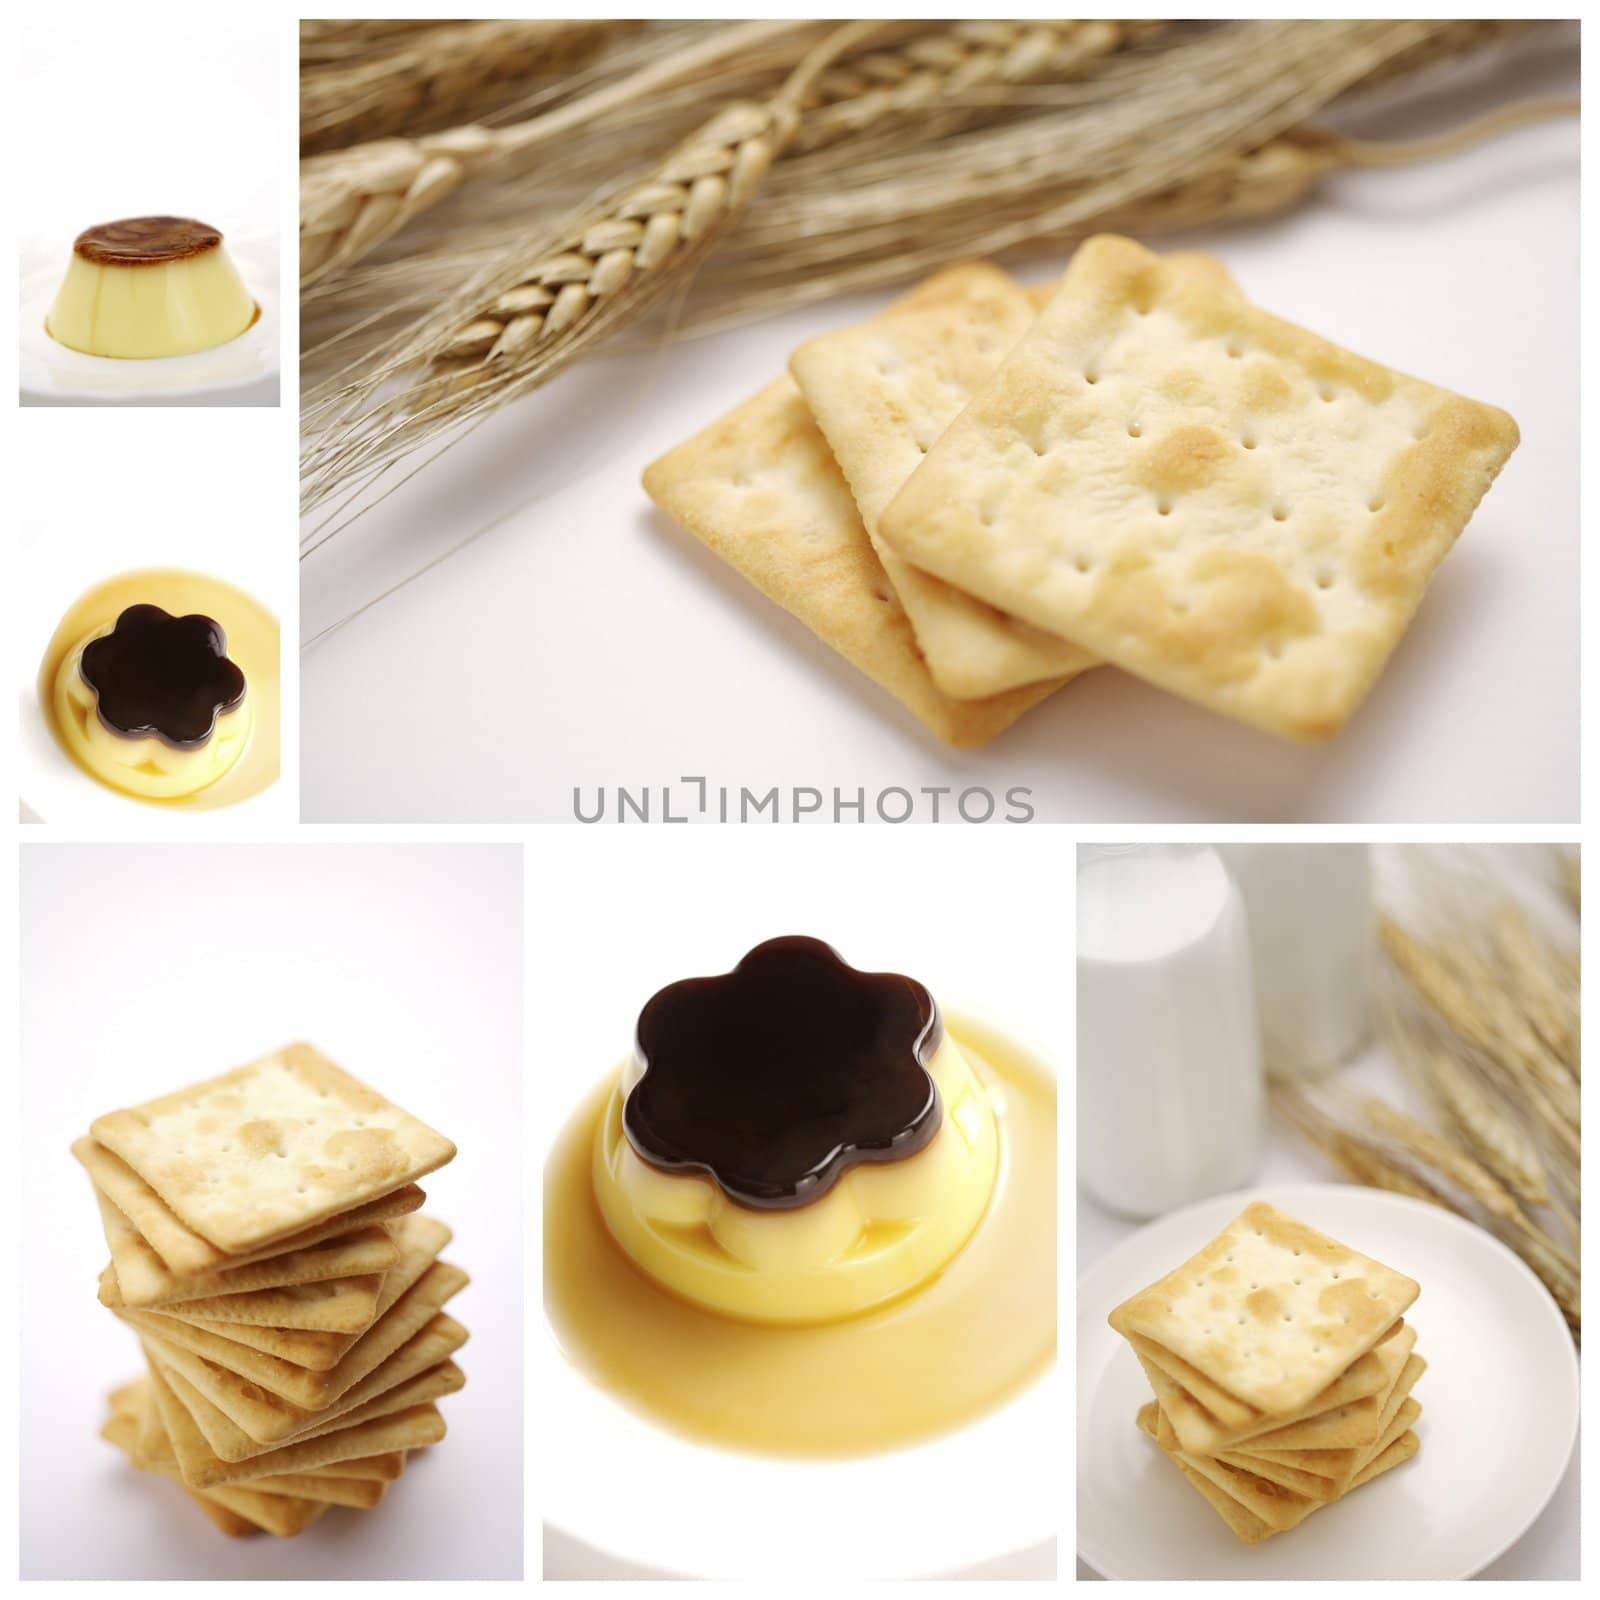 set of different dessert photos arranged together into a collage by Baltus